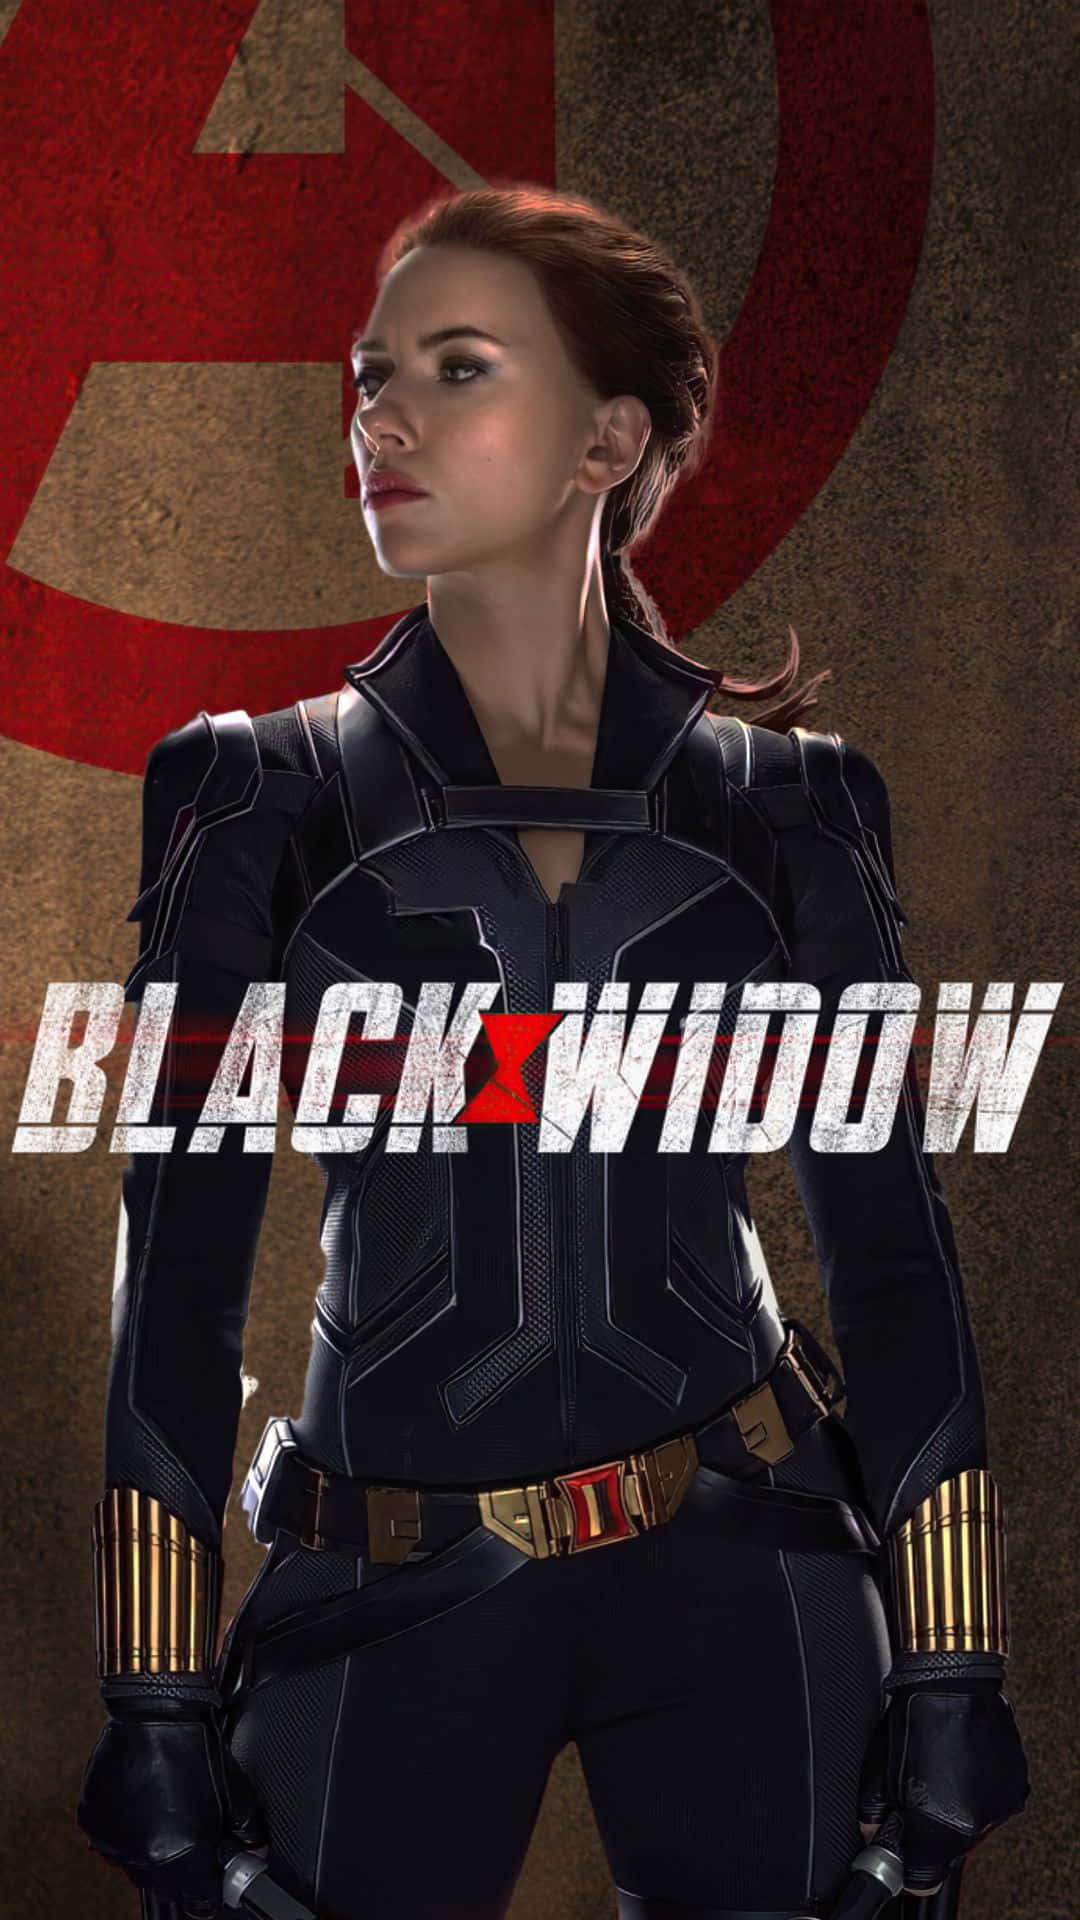 Dress up your iPhone with the Black Widow Look Wallpaper